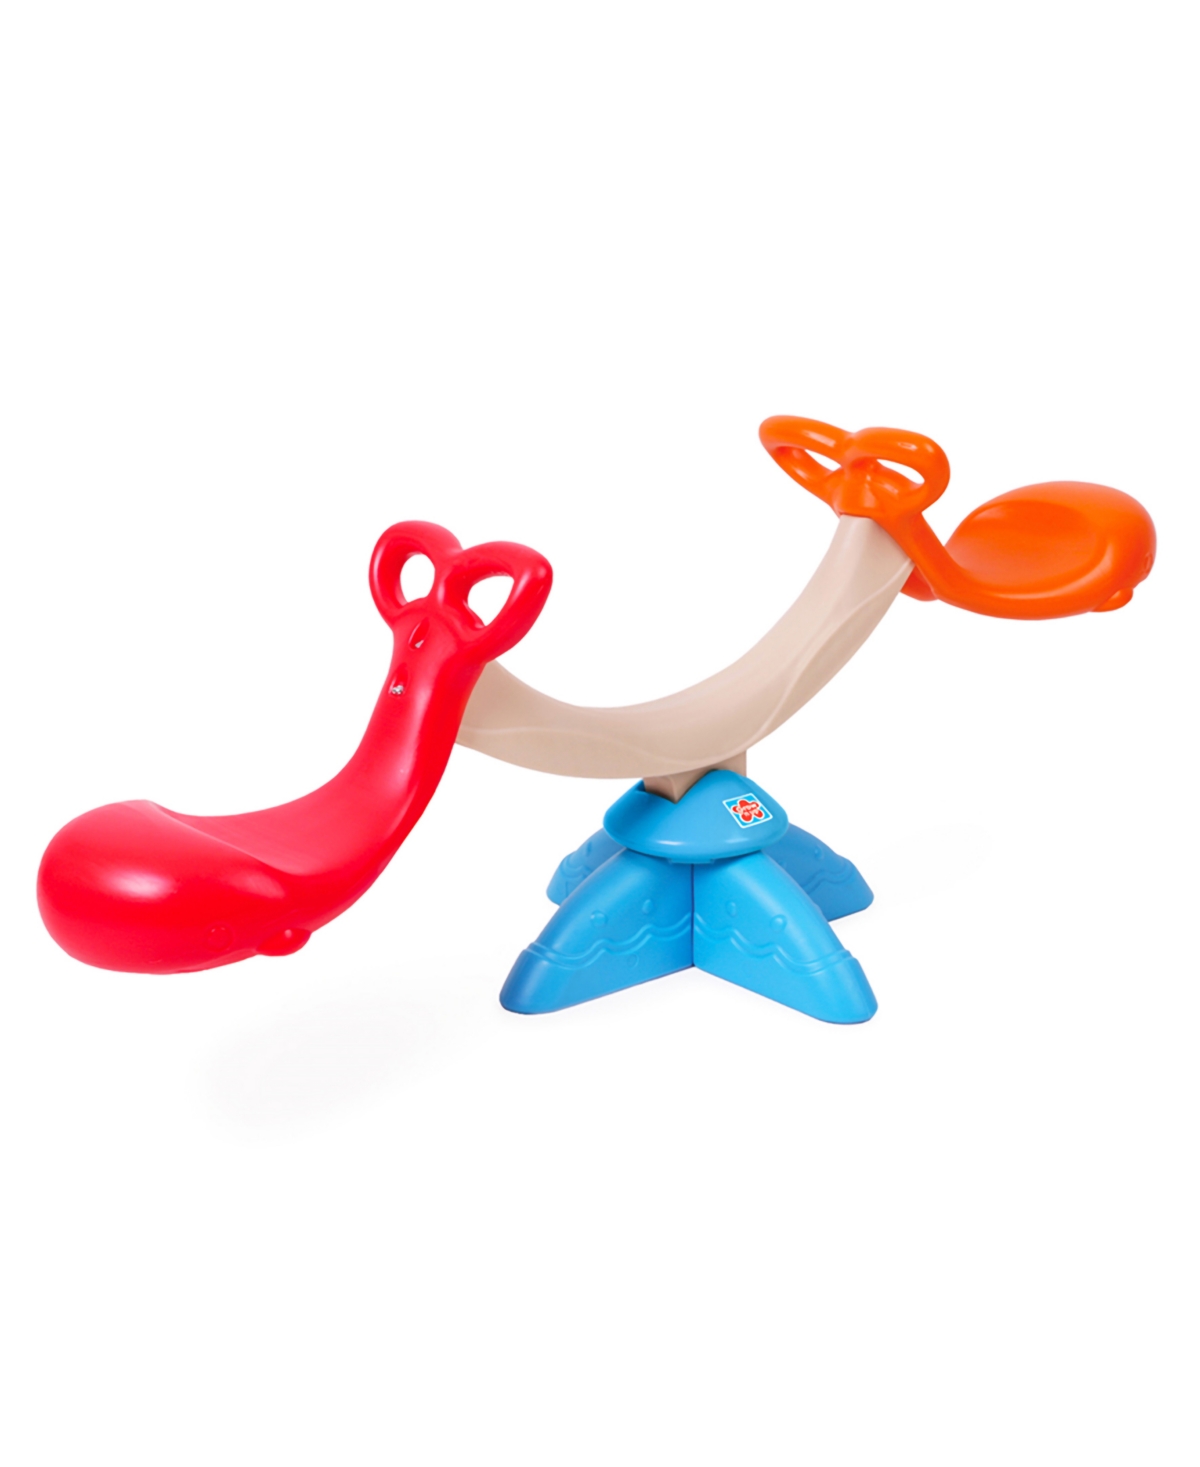 Grow 'n Up Kids' Happy Whale Seesaw With Rotation In White